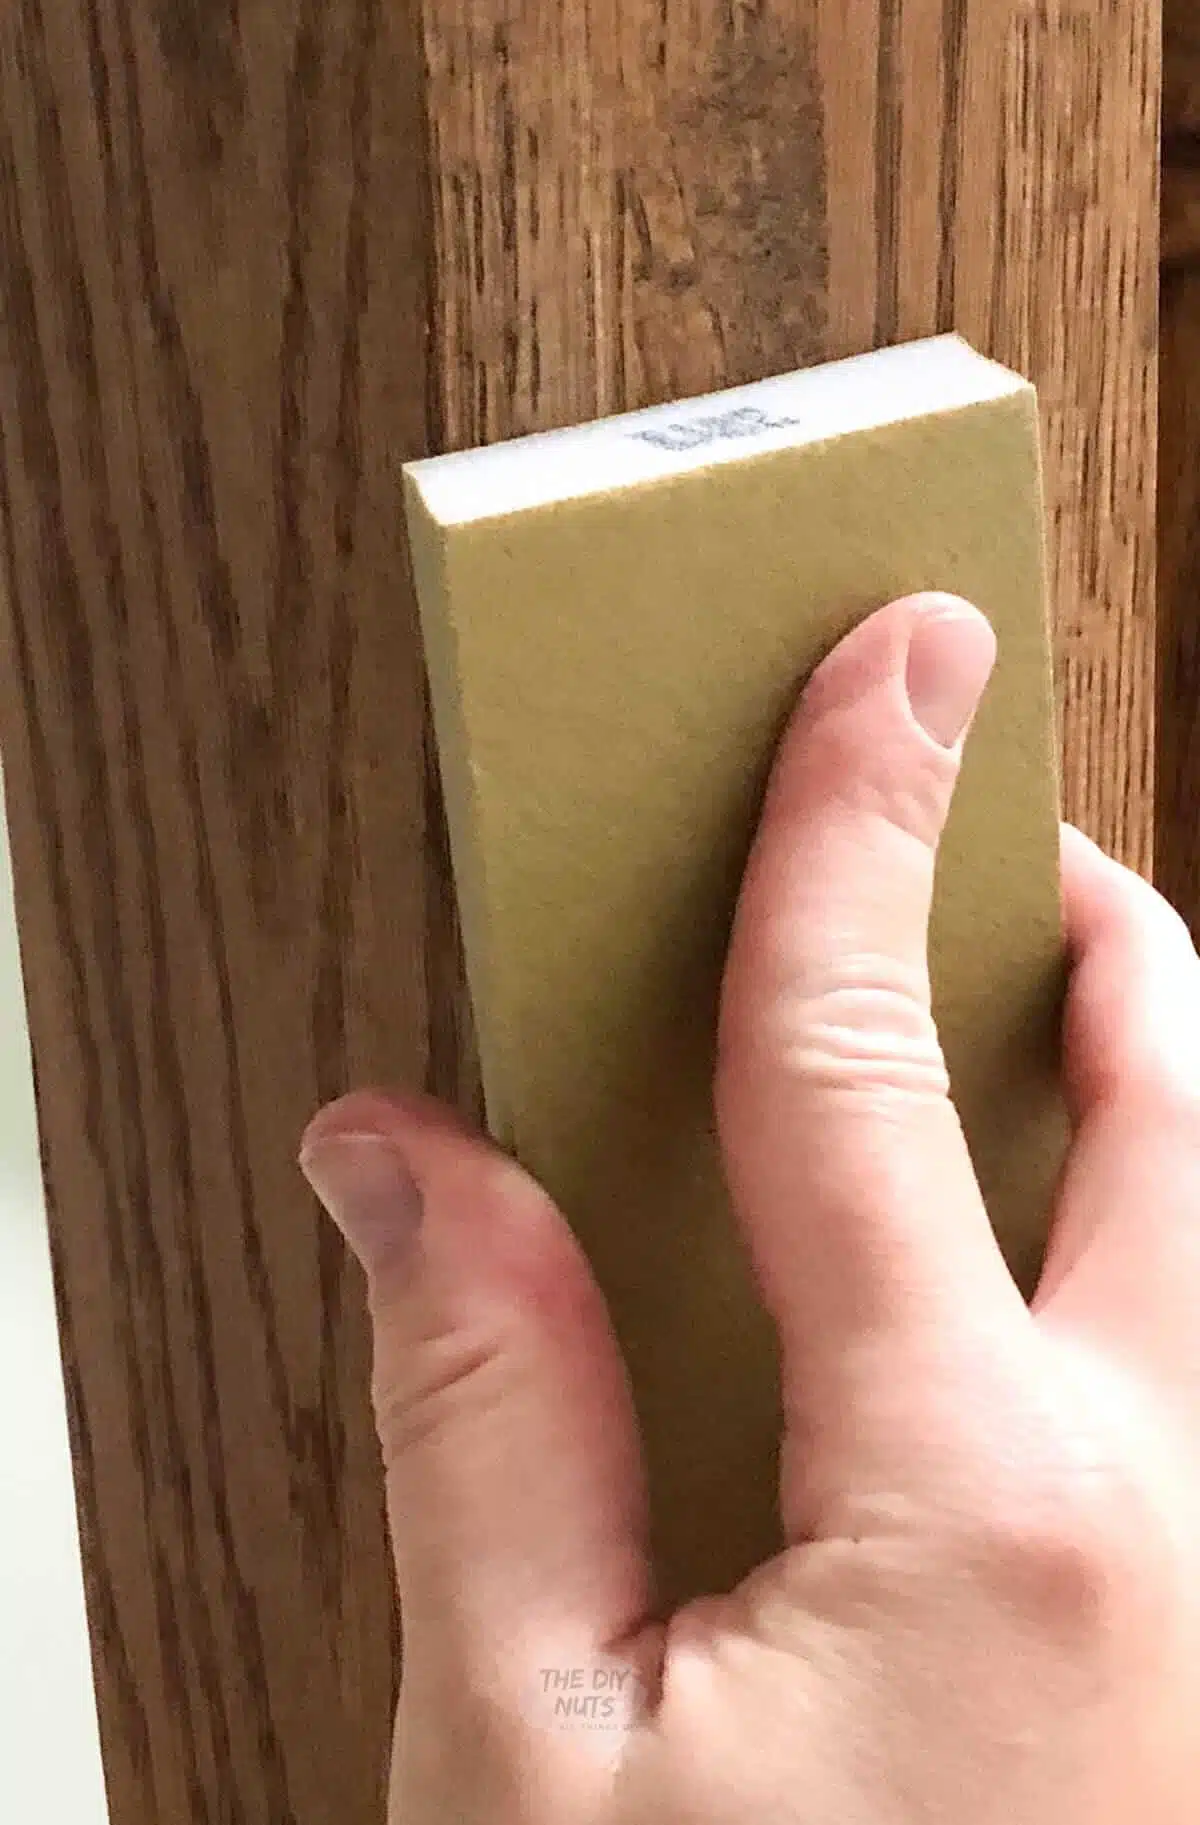 sandpaper block used to prep oak cabinets before painting